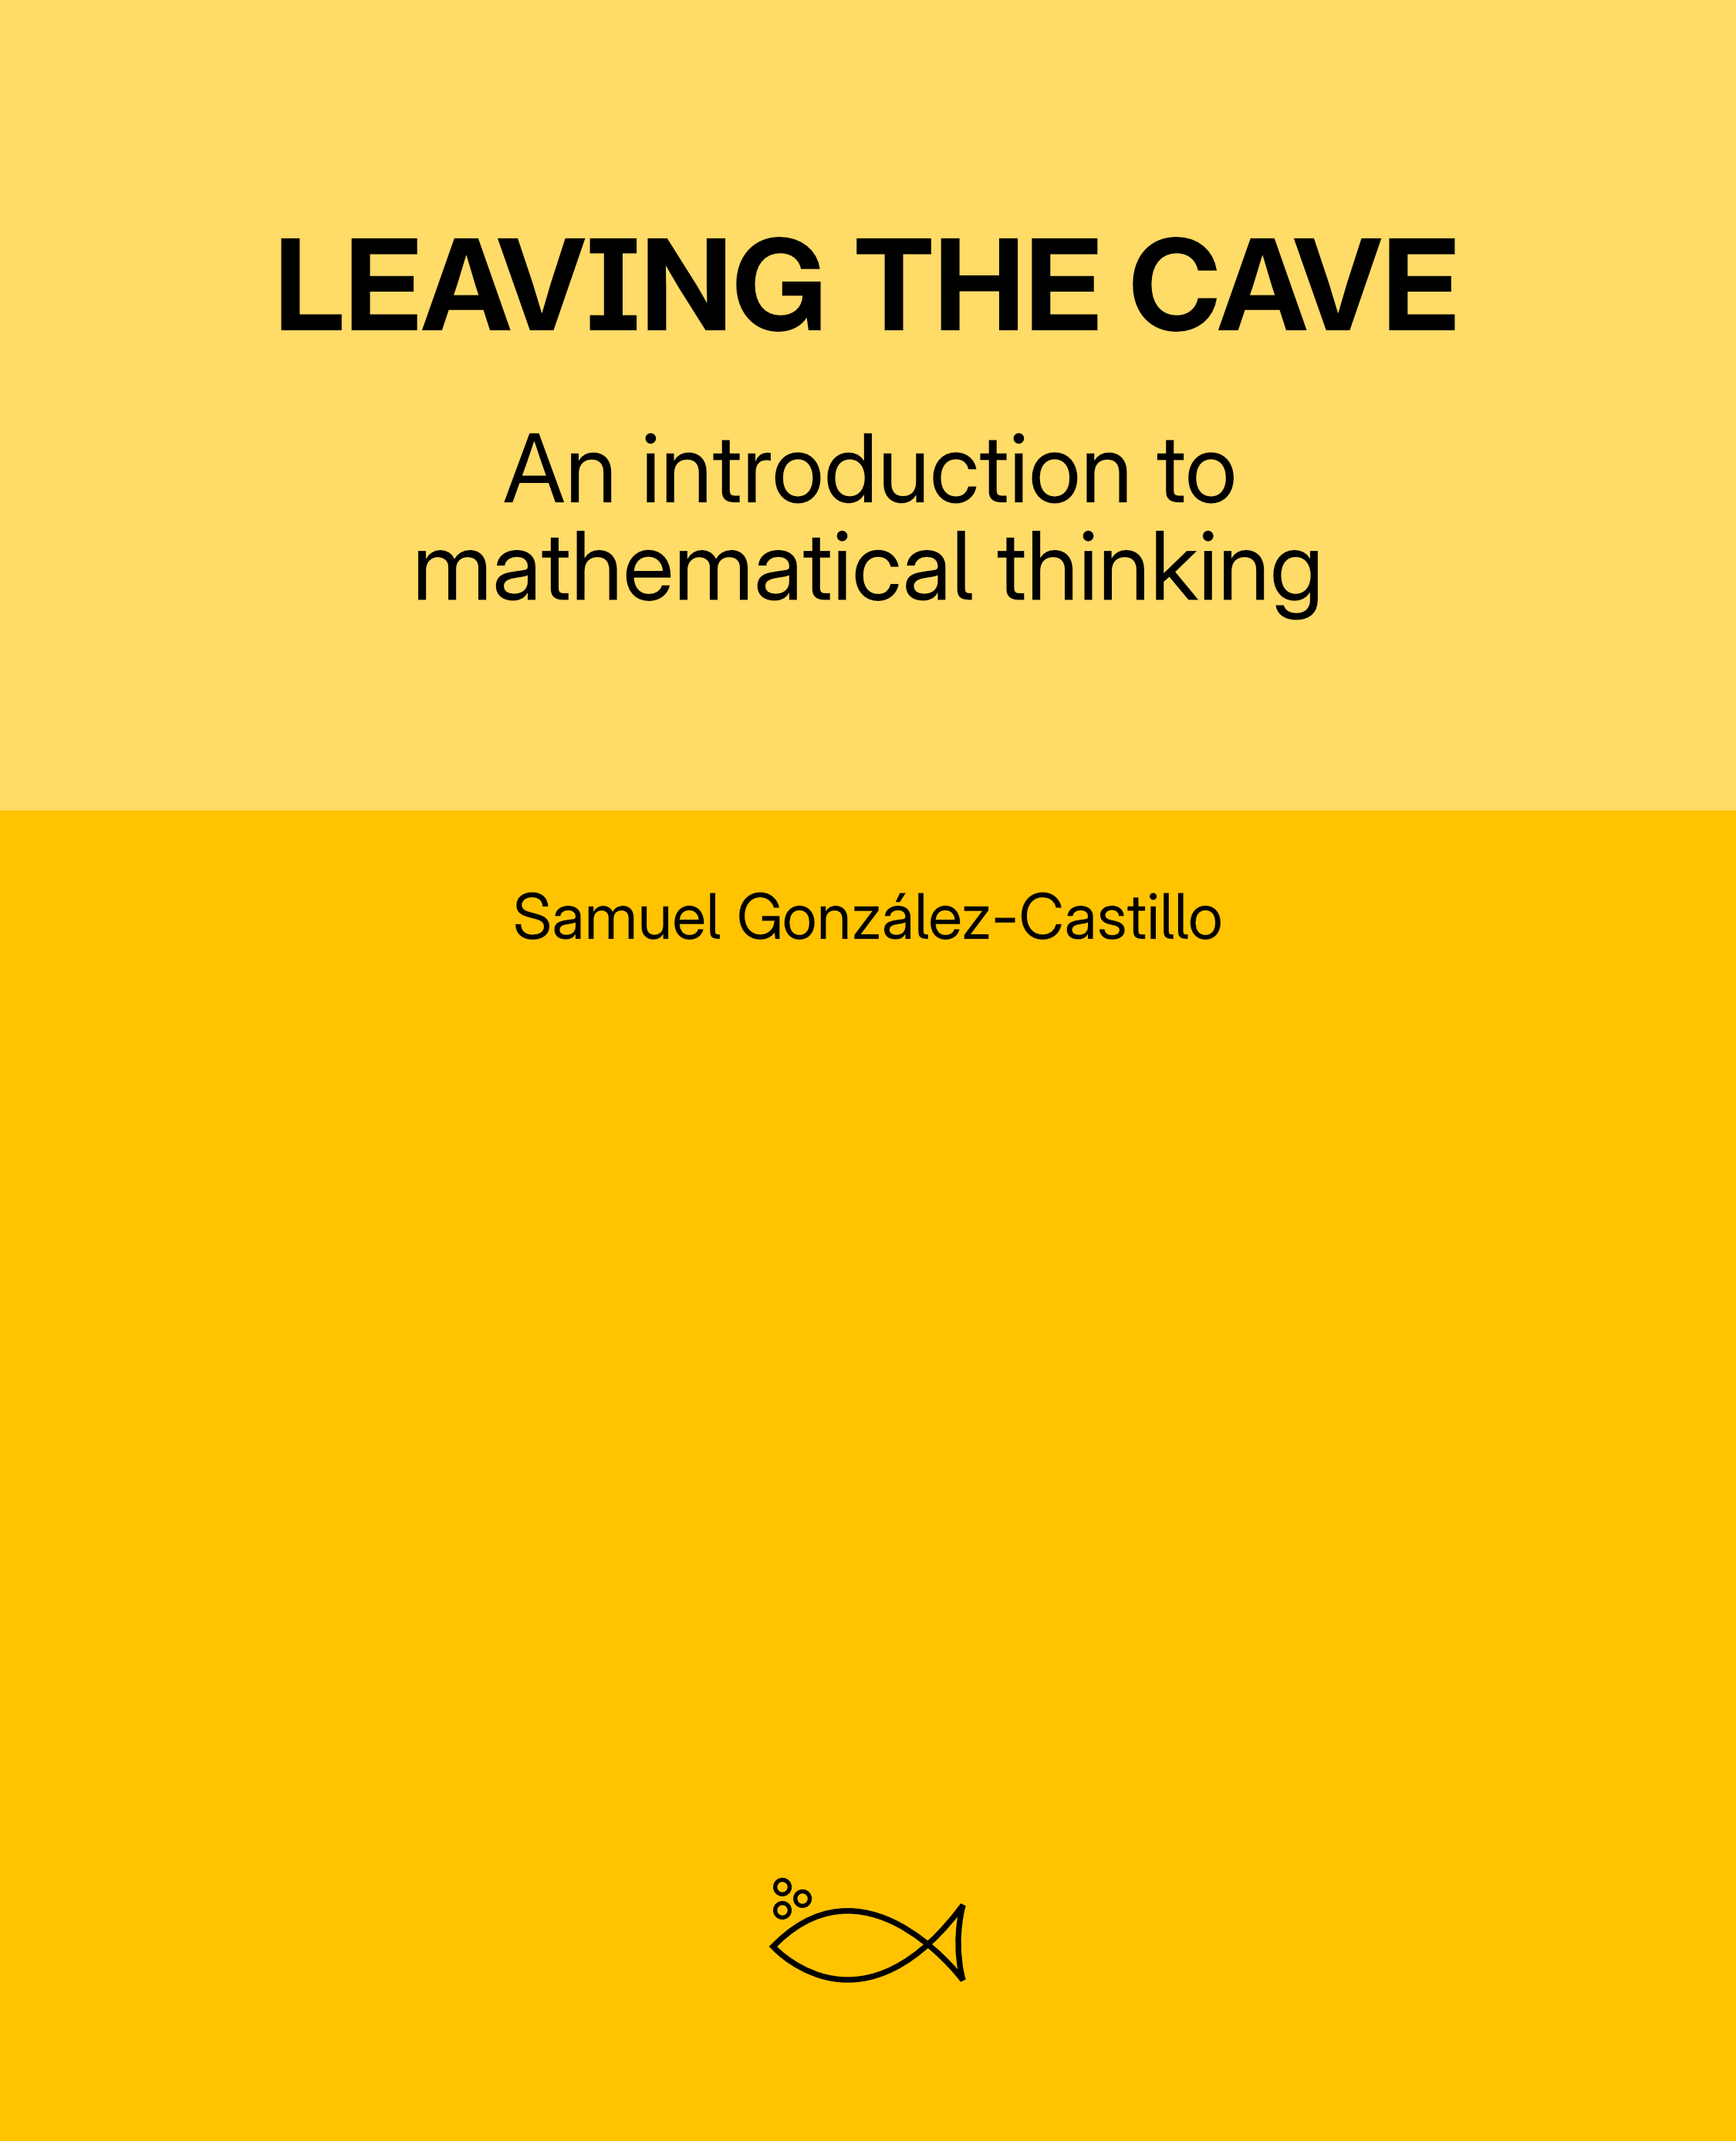 Book cover of 'Leaving the cave: An introduction to mathematical thinking'